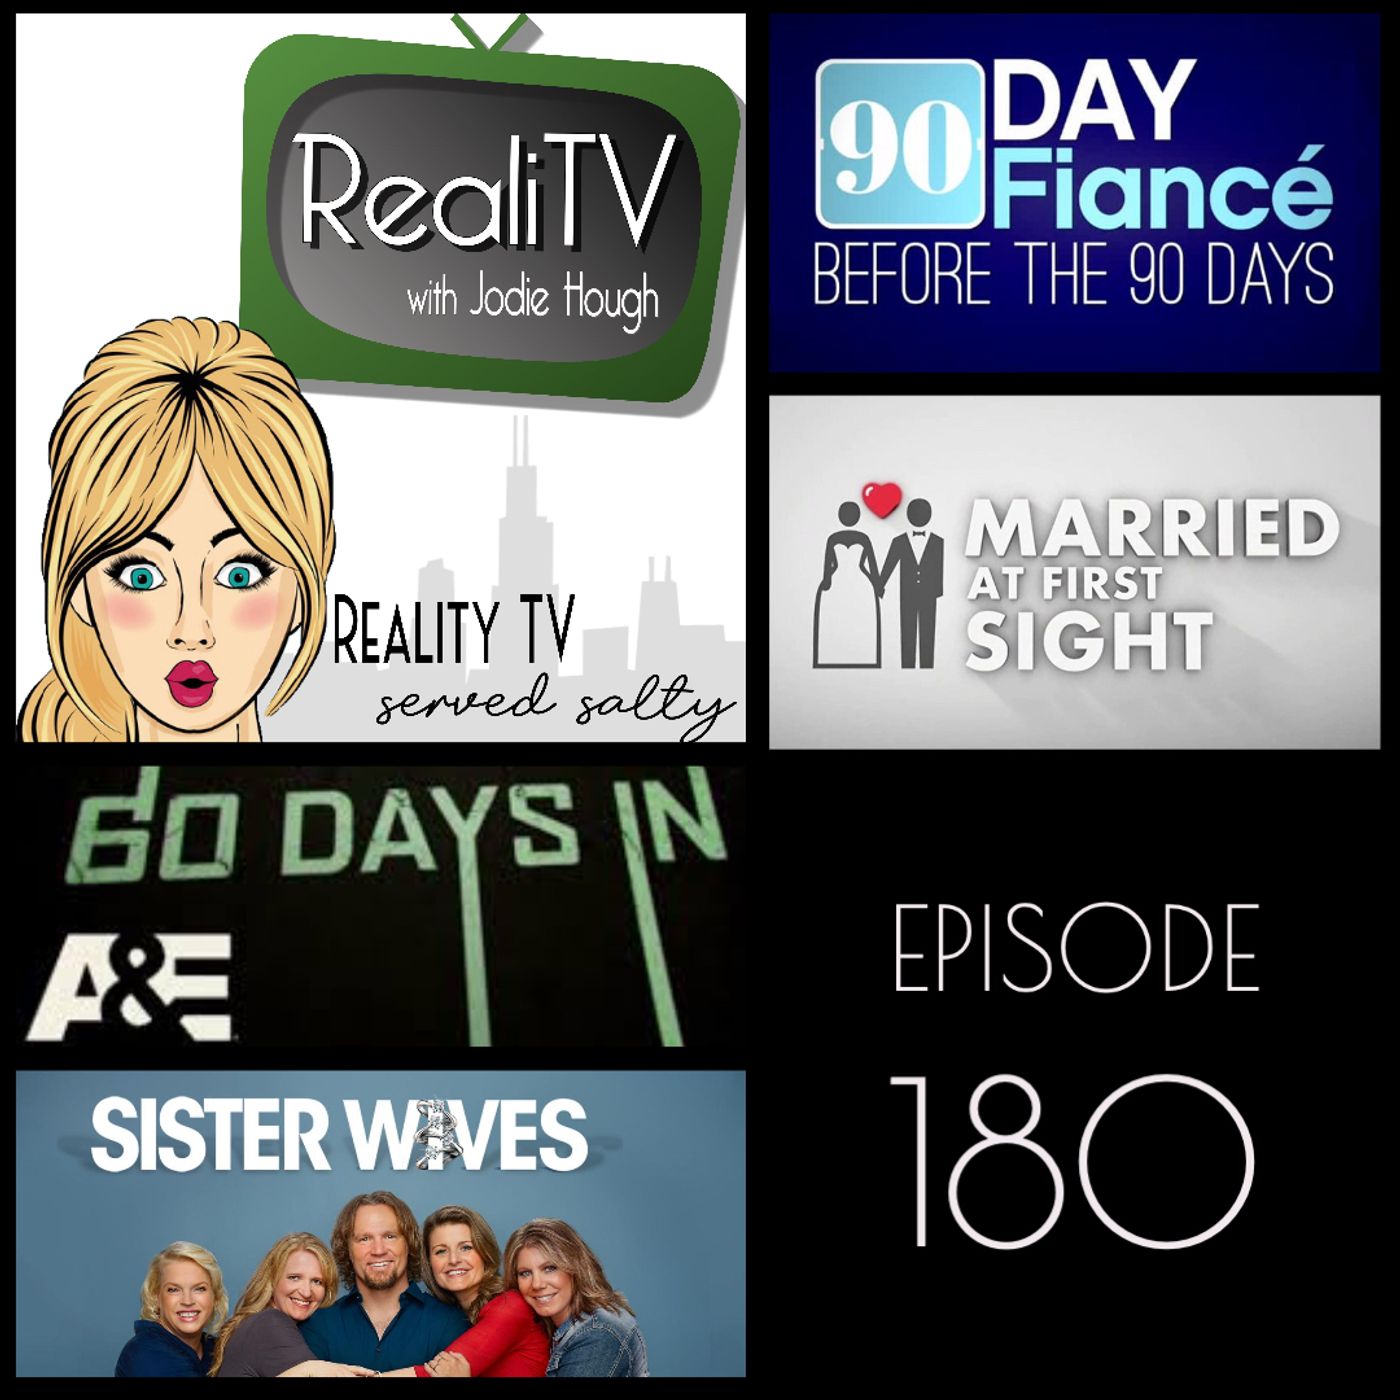 180: 90 Day Fiance Before the 90 Days, Sister Wives, Married at First Sight & 60 Days In